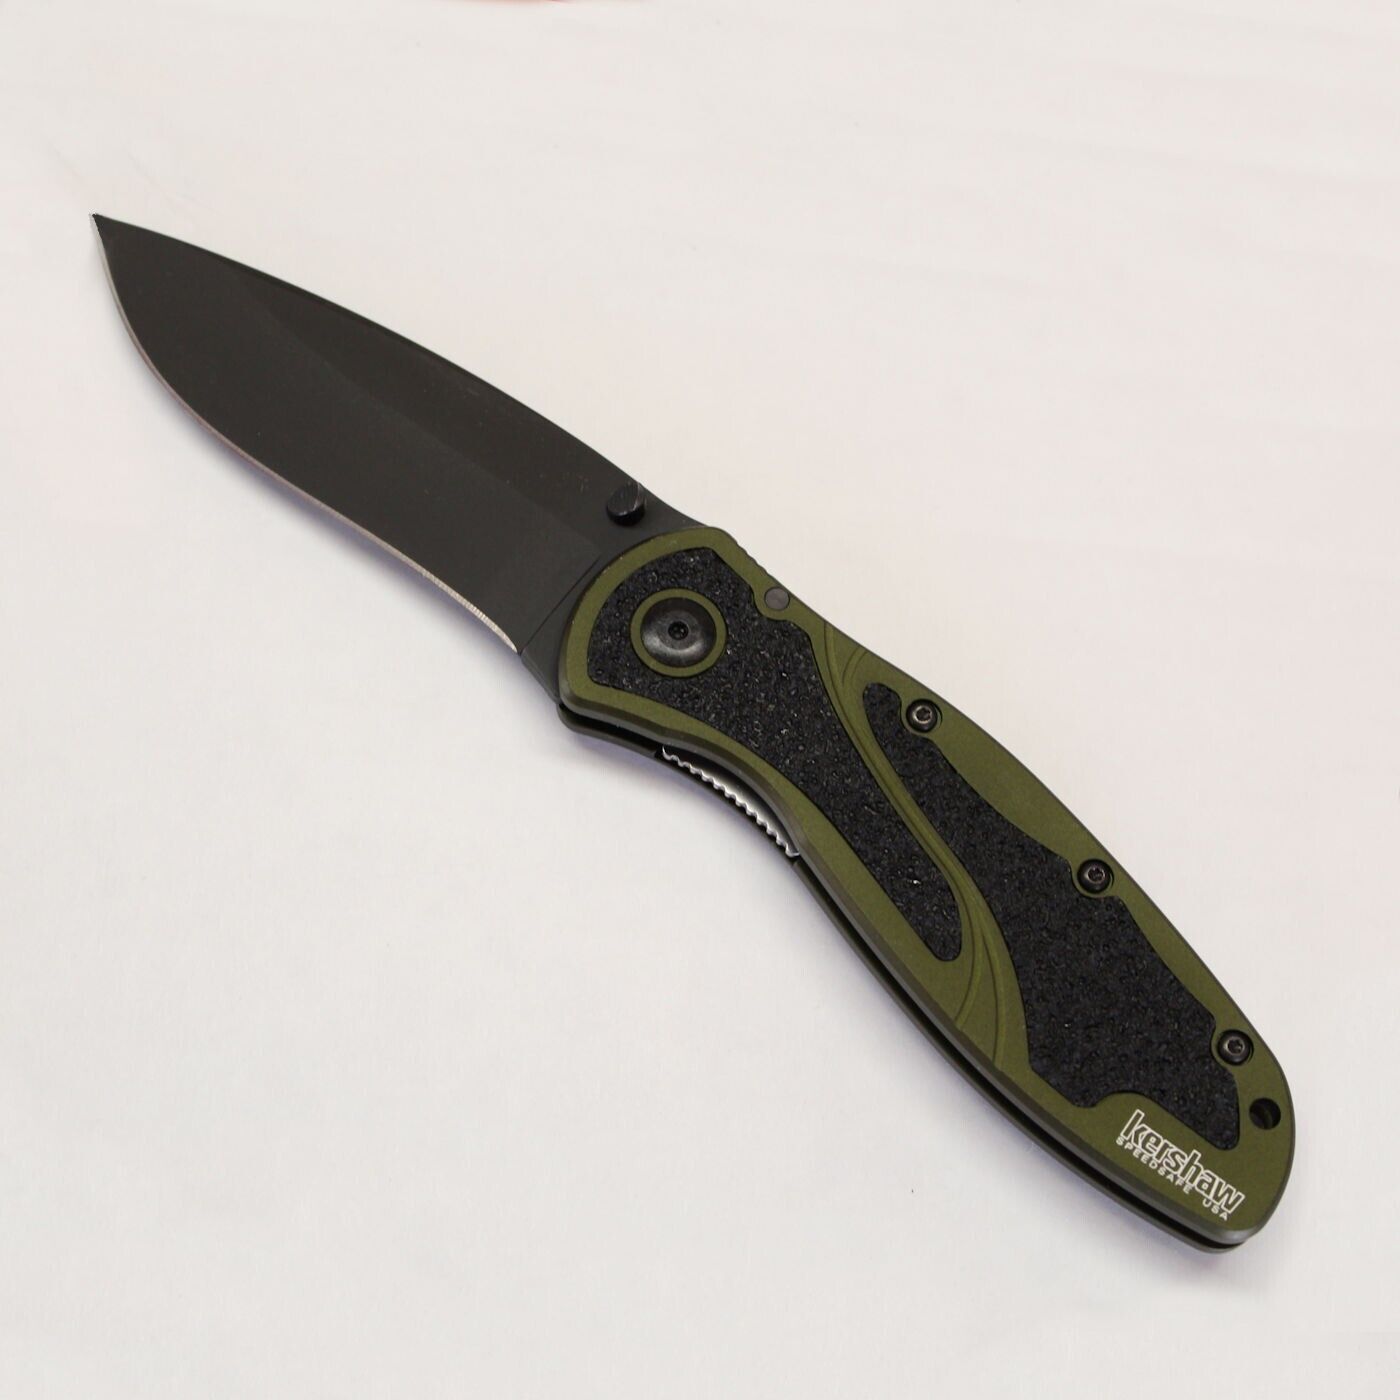 Kershaw 1670OLBLK Blur, Assisted Opening, Brand New Blem, Factory 2nd